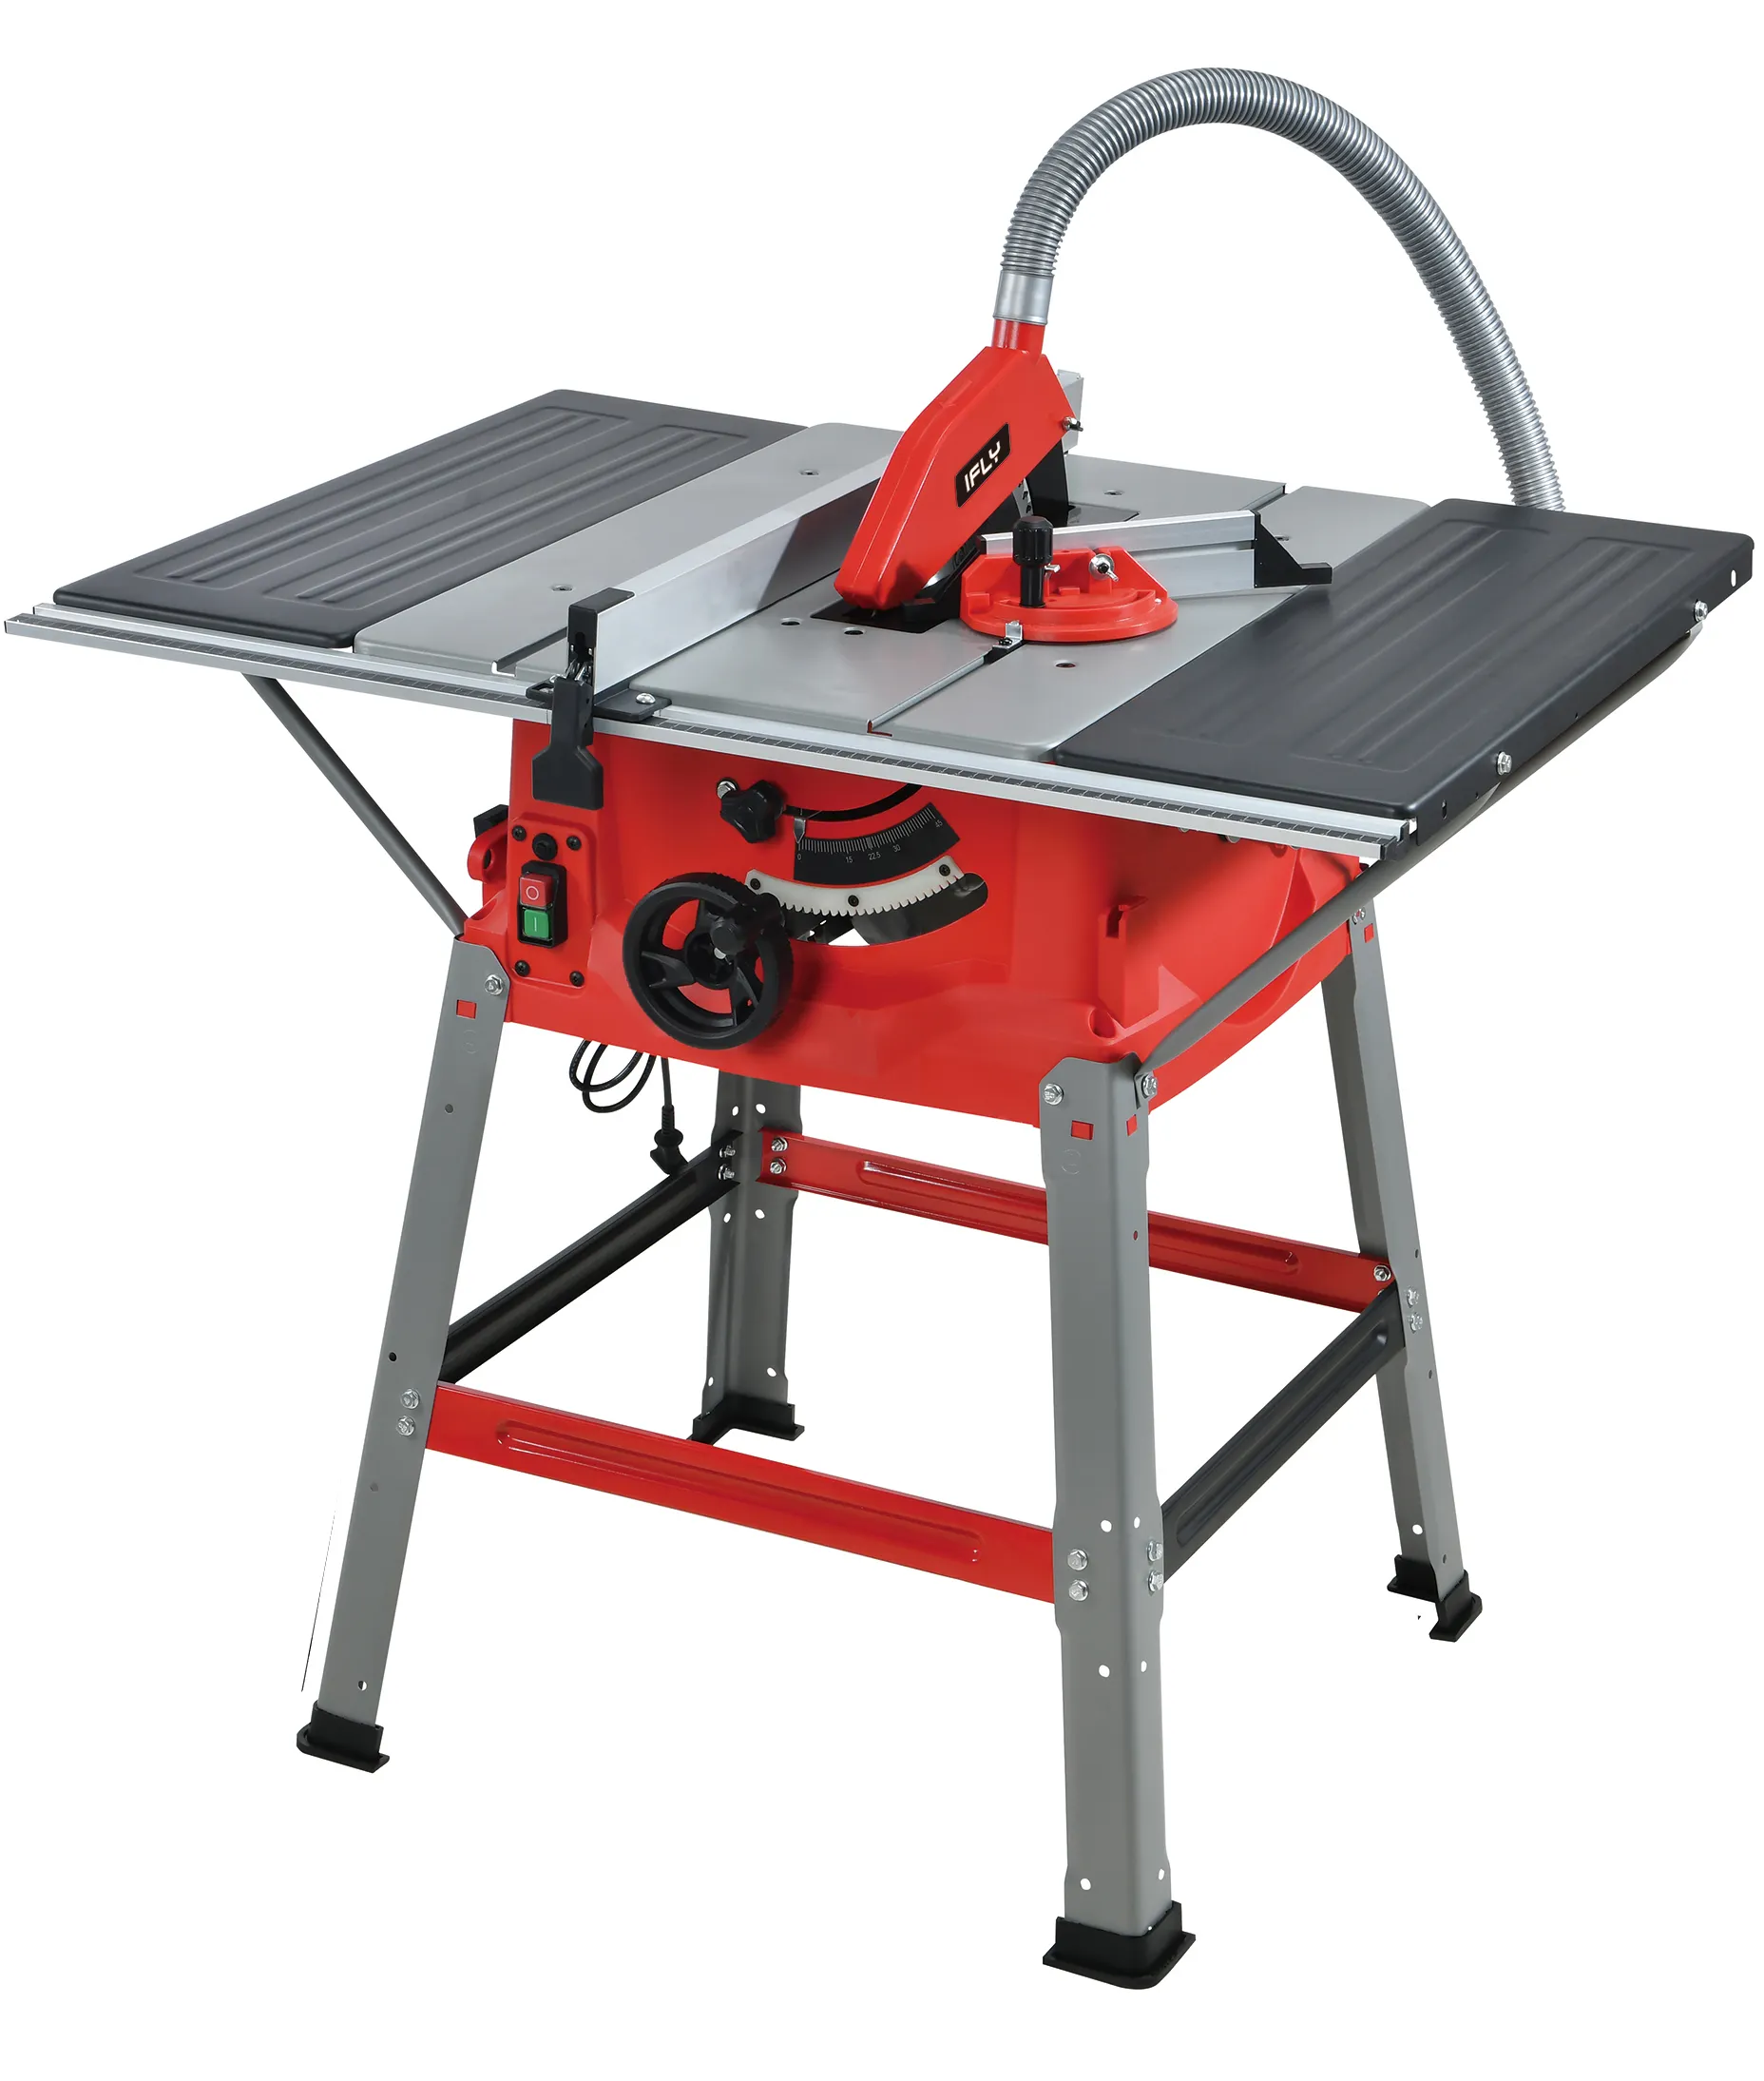 Easy operating Woodwork 10-Inch 1800W Portable Table Saw with Metal Stand